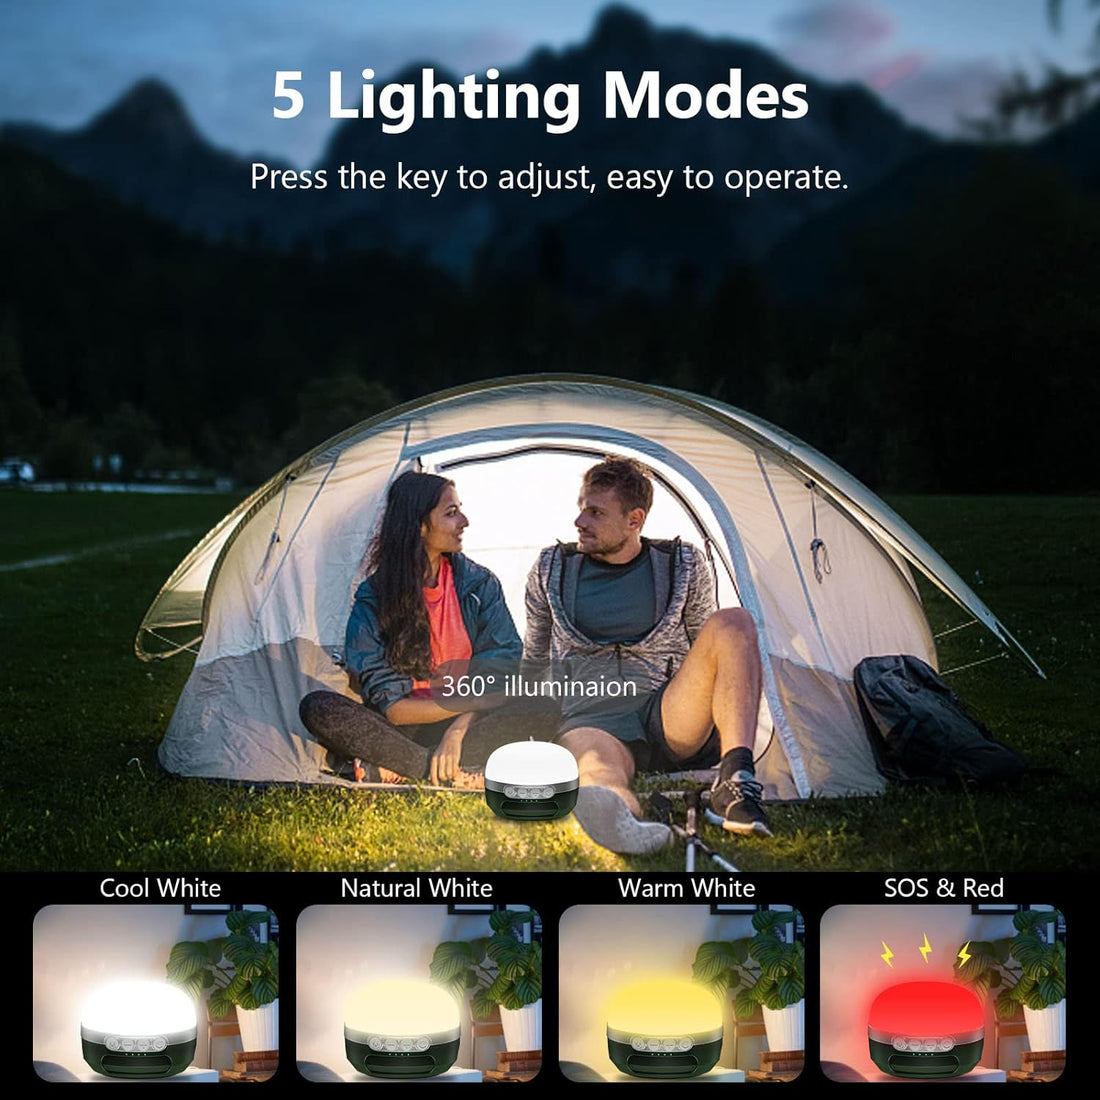 LED Camping Lantern 8400mAh USB-C Rechargeableï¼Å’Camping Lights with RGB Color Changing, 5 Light Modes, Stepless Dimming, Waterproof & Strong Magnet for Hurricane Emergency, Hiking & Power Outages